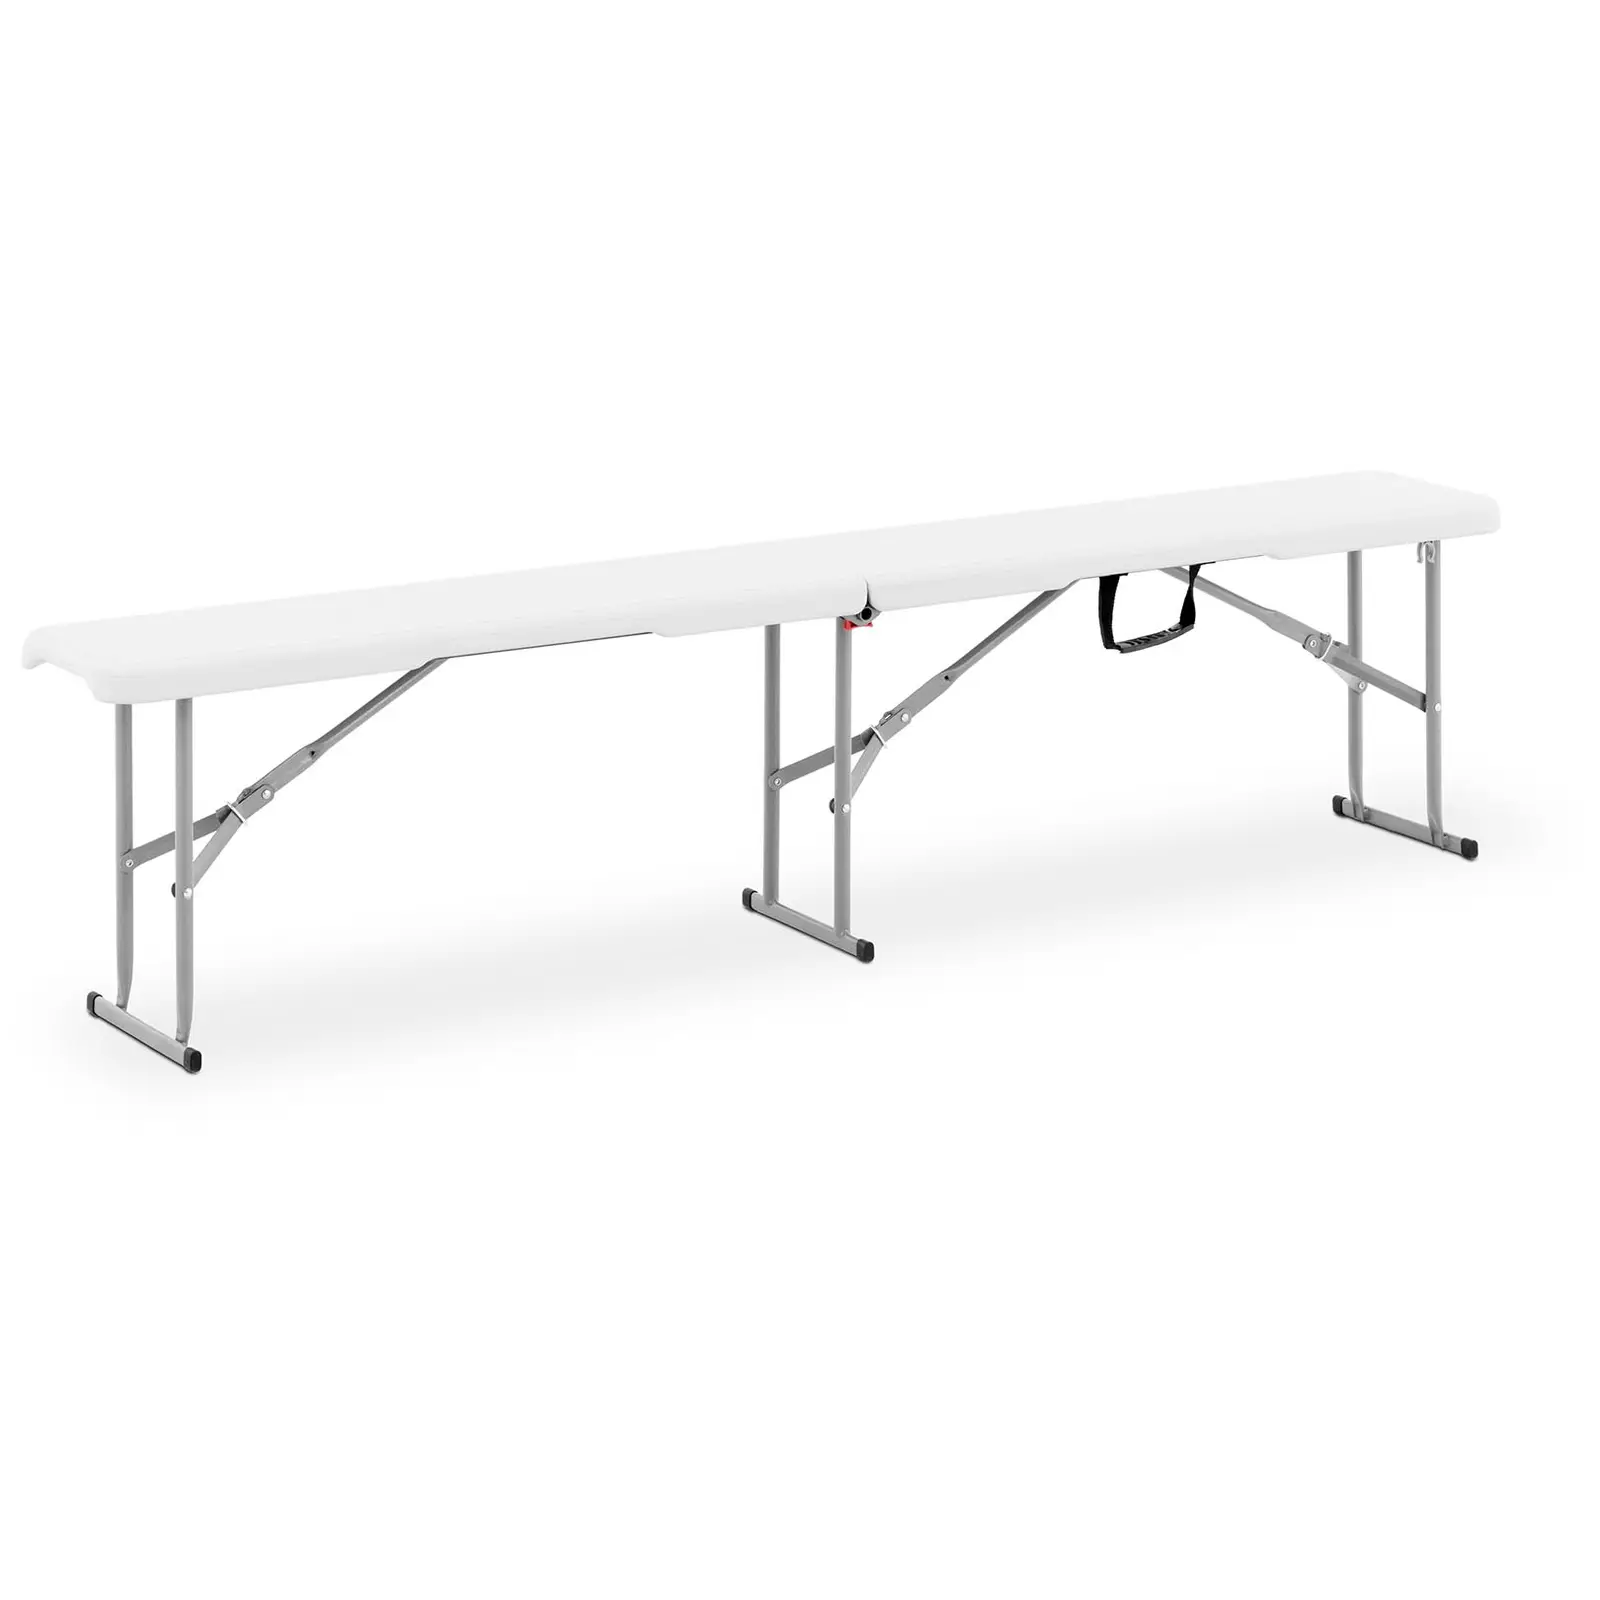 Occasion Banc pliable - 1830 x 300 x 430 mm - Royal Catering - 300 kg - Blanc